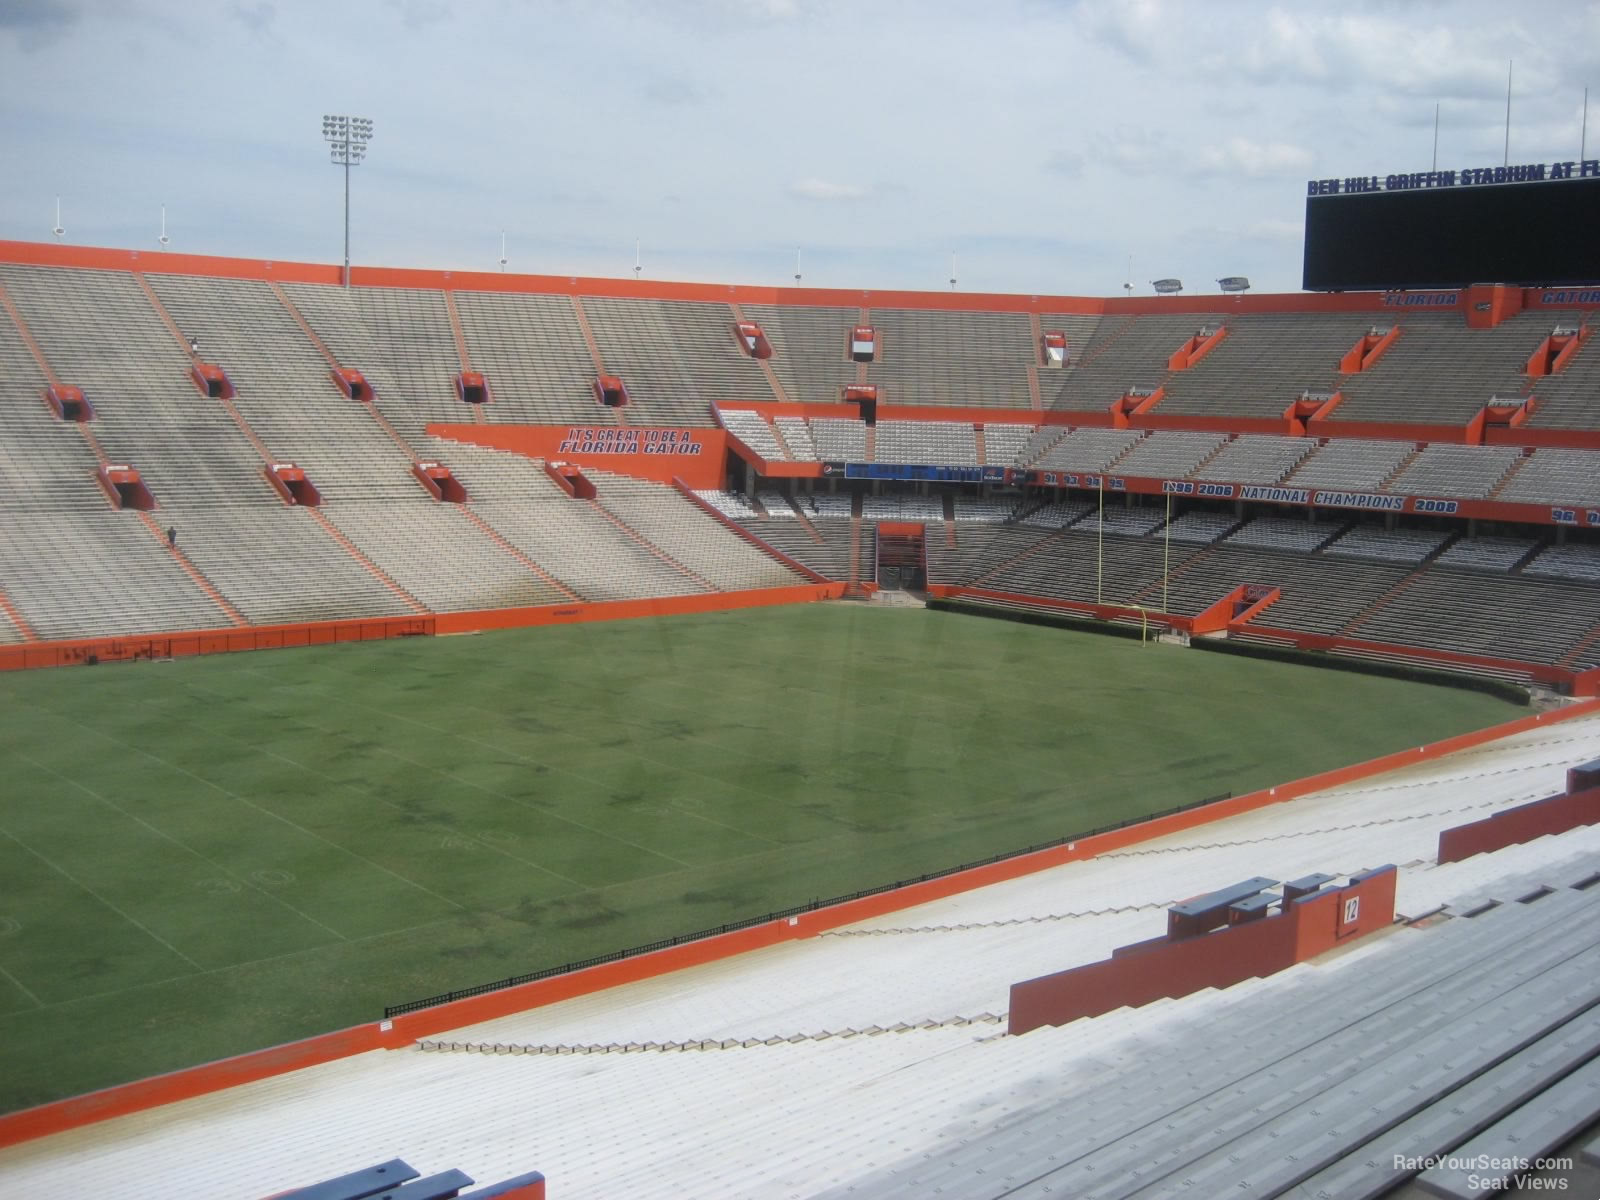 section 15, row 58 seat view  - ben hill griffin stadium